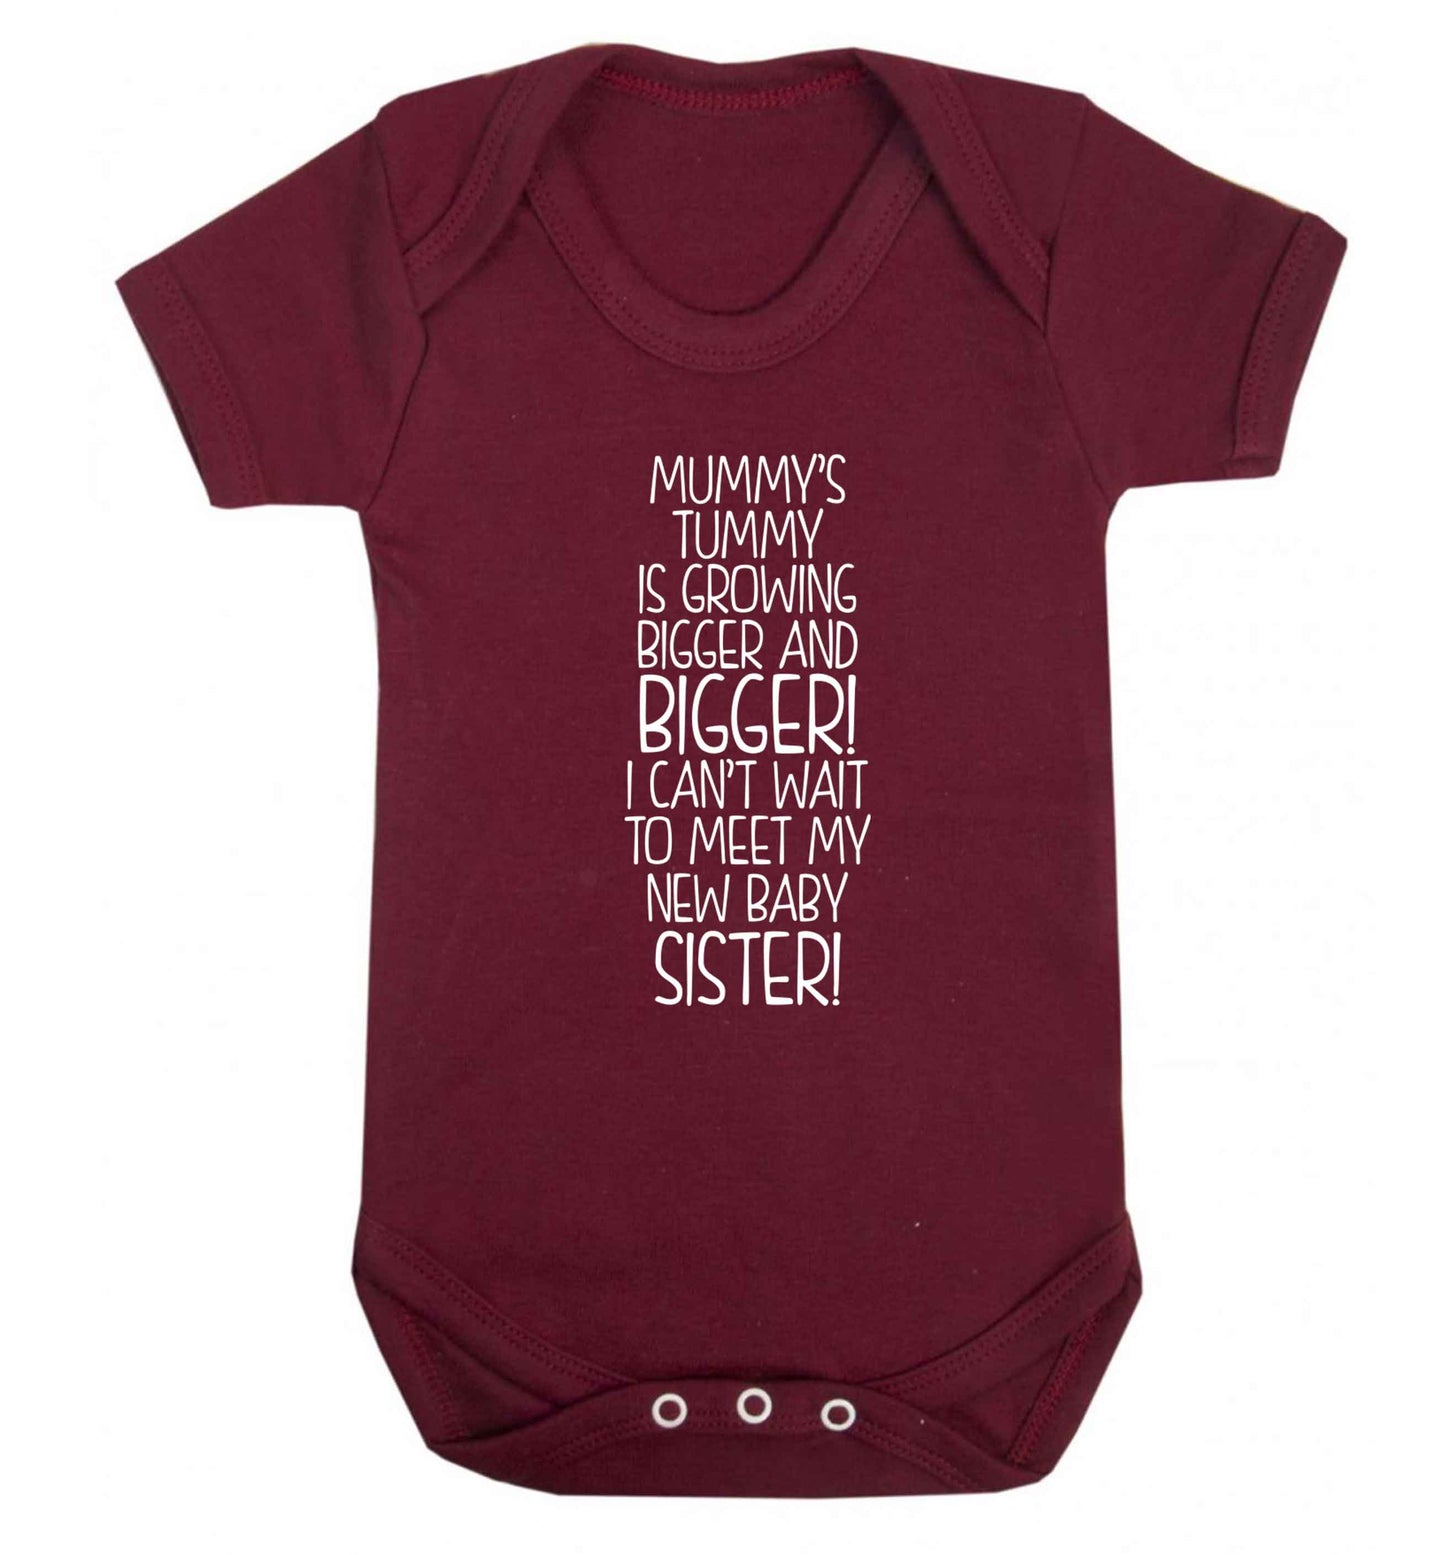 Mummy's tummy is growing bigger and bigger I can't wait to meet my new baby sister! Baby Vest maroon 18-24 months